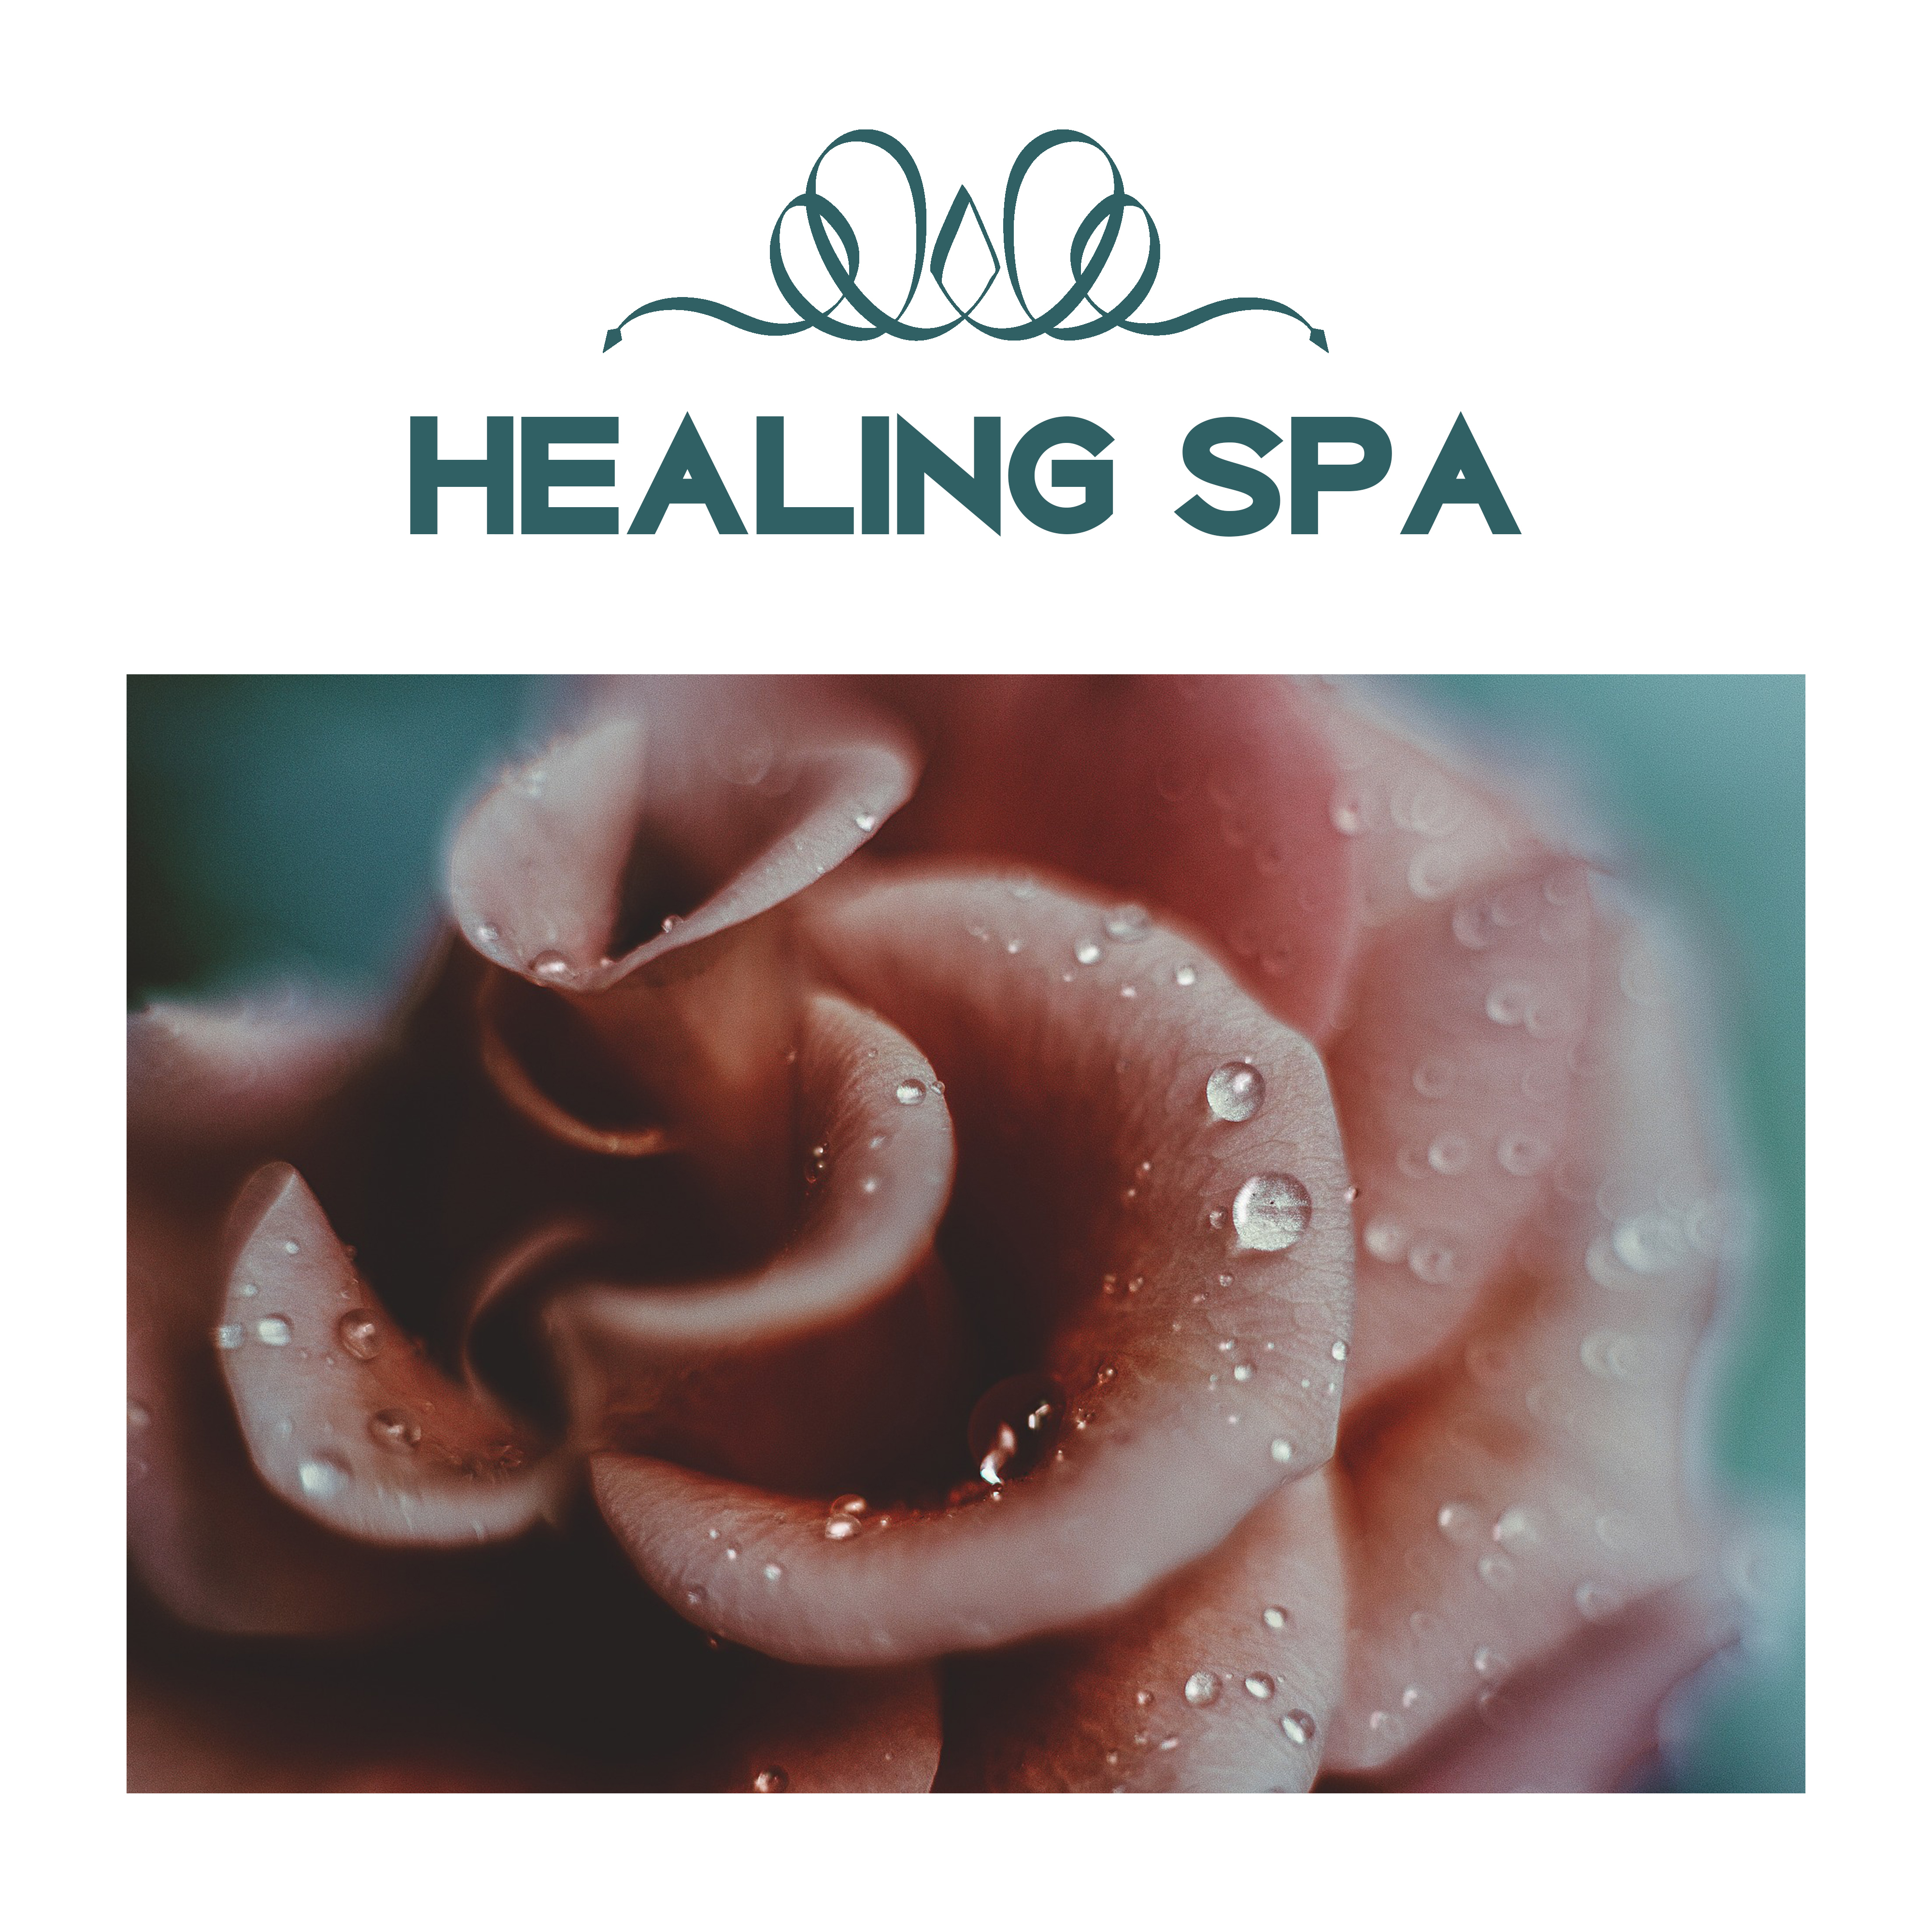 Healing Spa – Nature Sounds to Rest, Relief for Body, Pure Mind, Spa Music, Sensual Massage, Restful Therapy, Relax